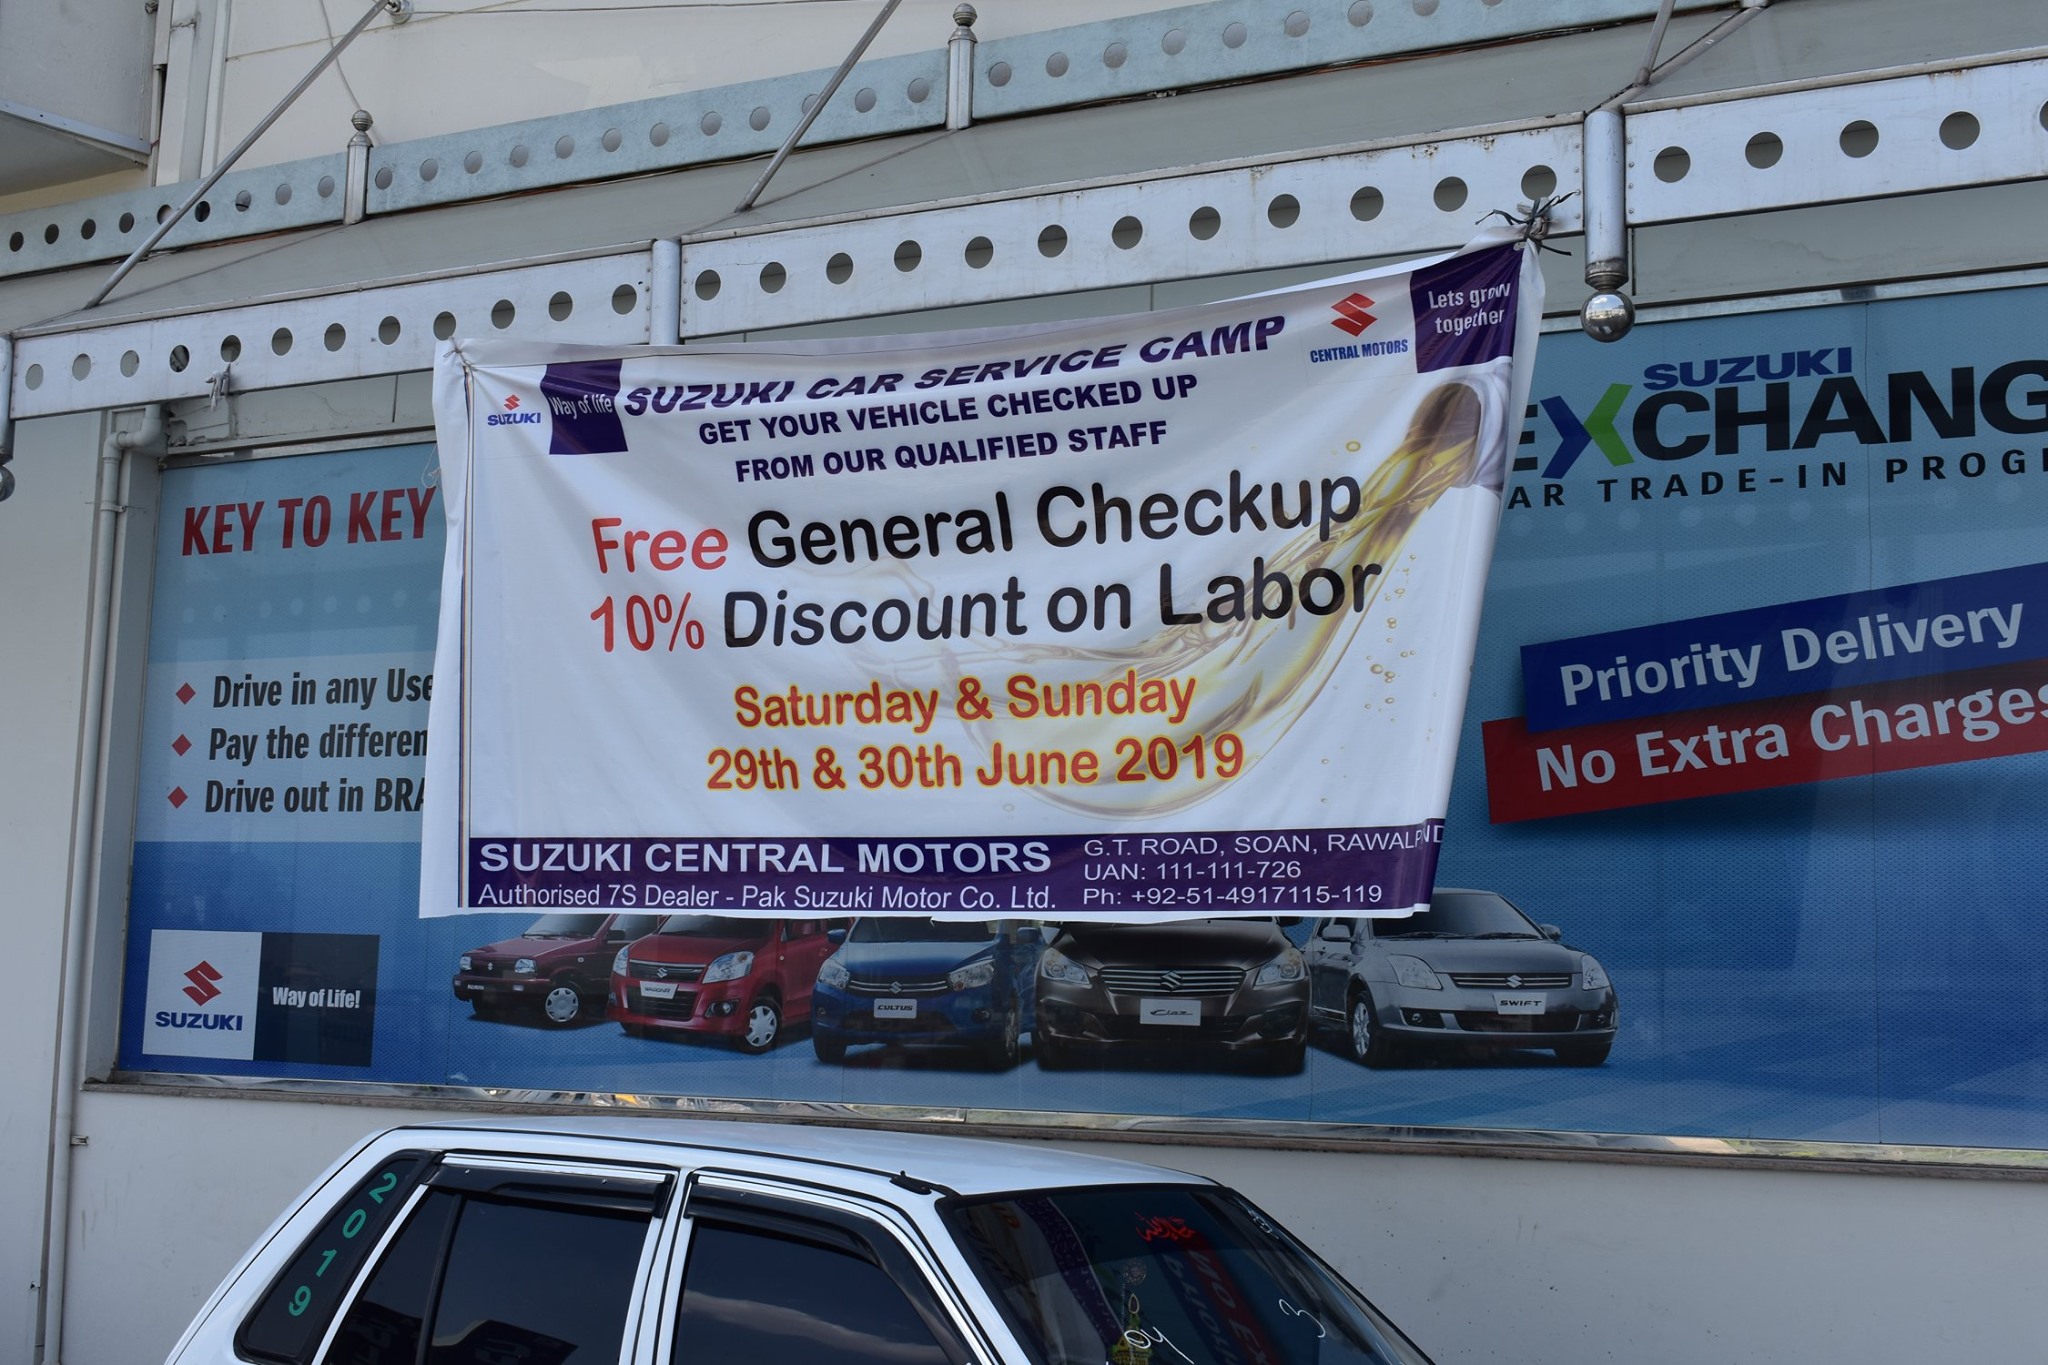 In-House Campaign For Customer Satisfaction held at suzuki central motors on 29 & 30 june 2019